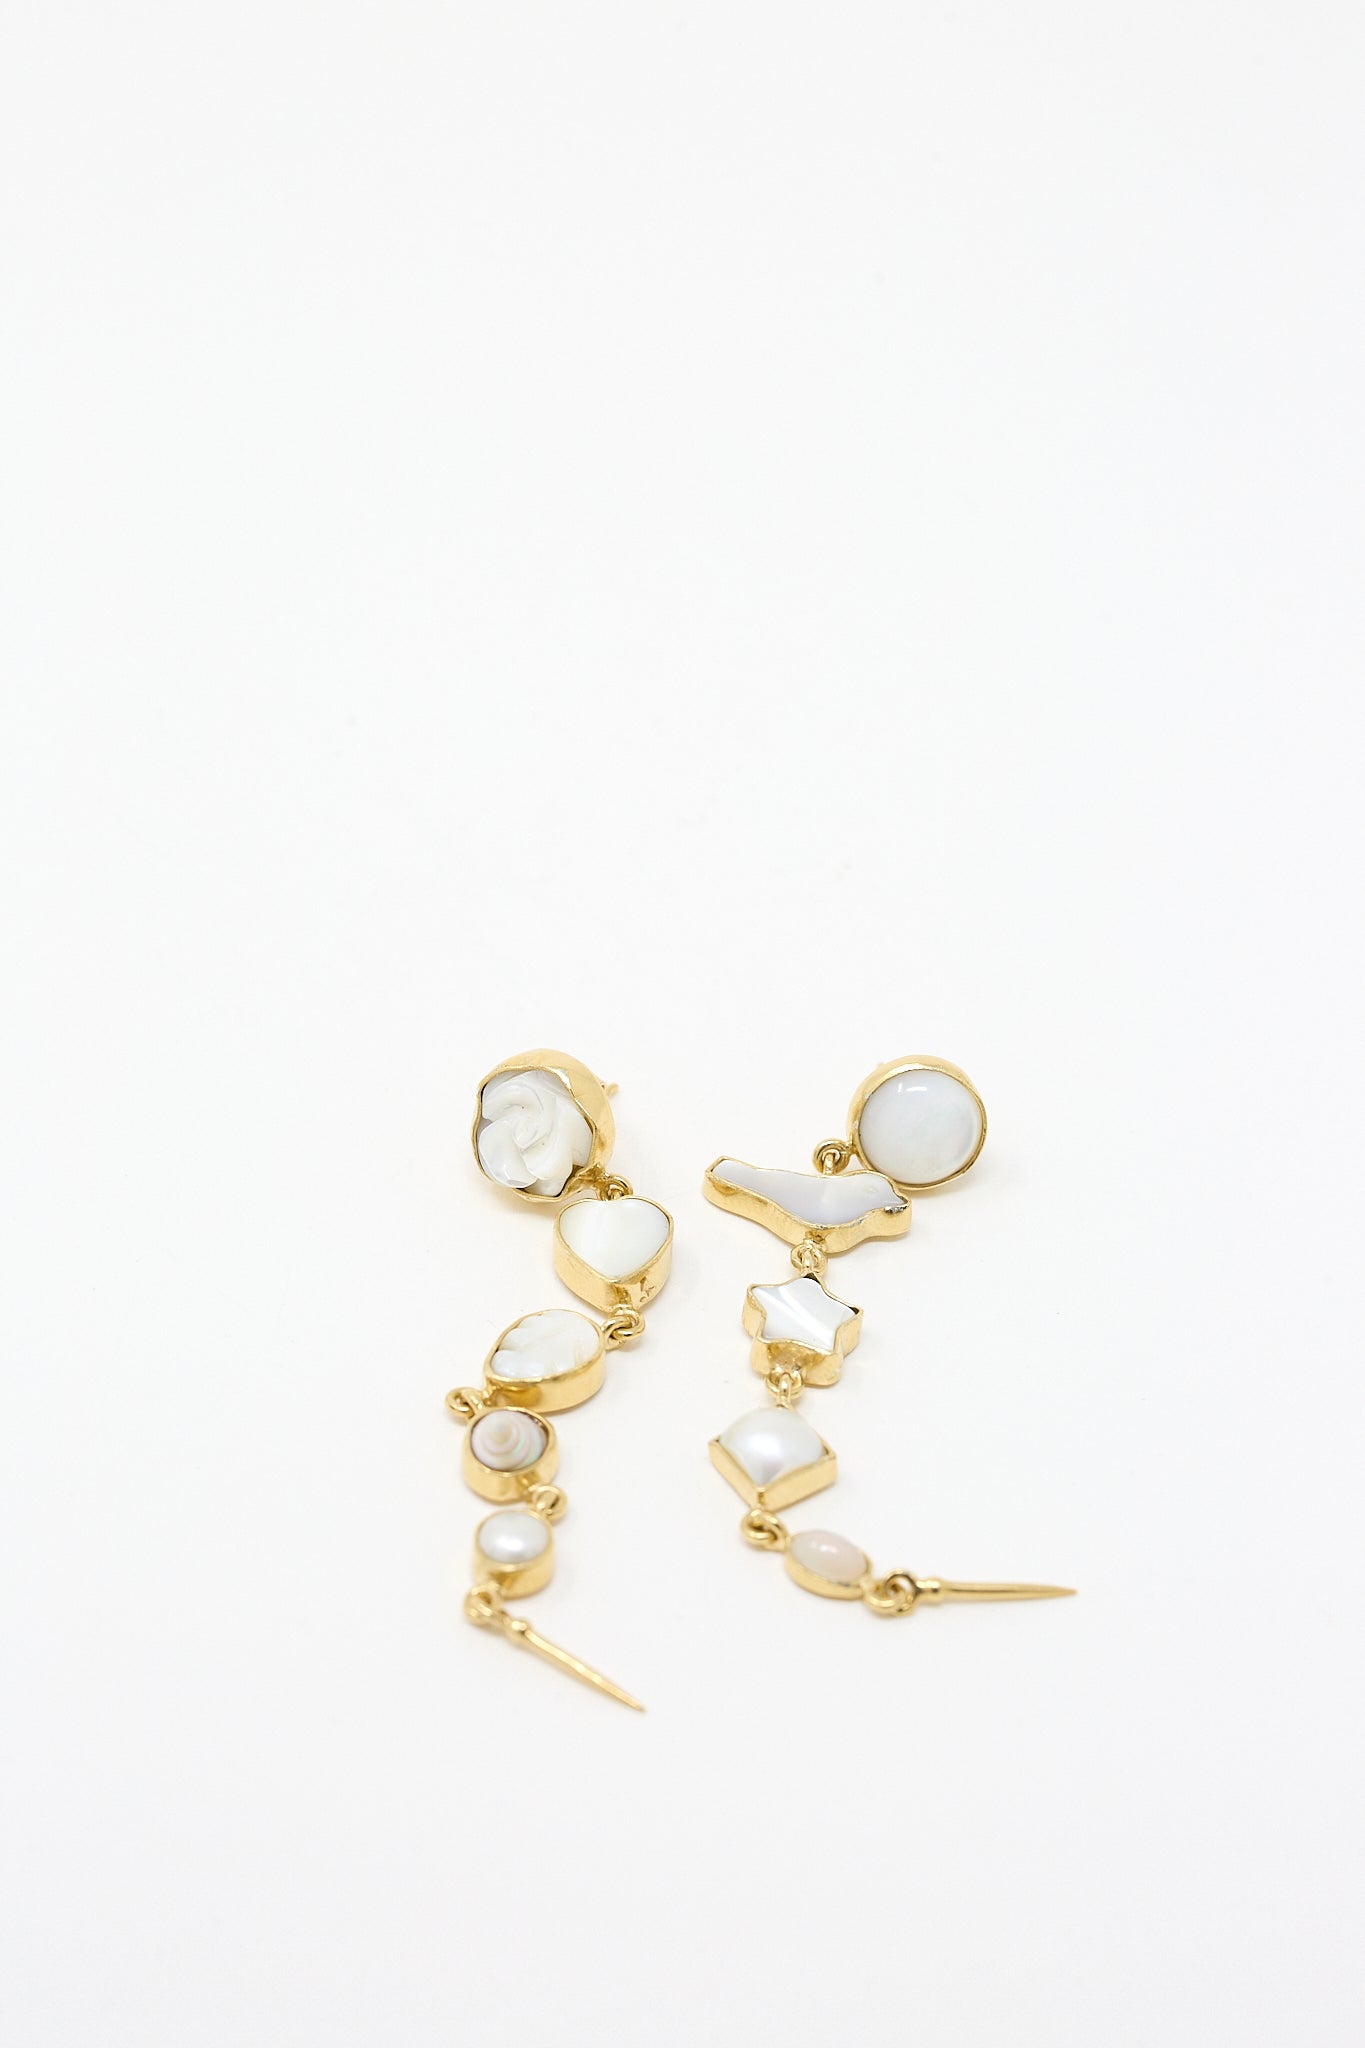 A pair of Five Charm with Victorian Drop Earrings by Grainne Morton with white mother of pearl.